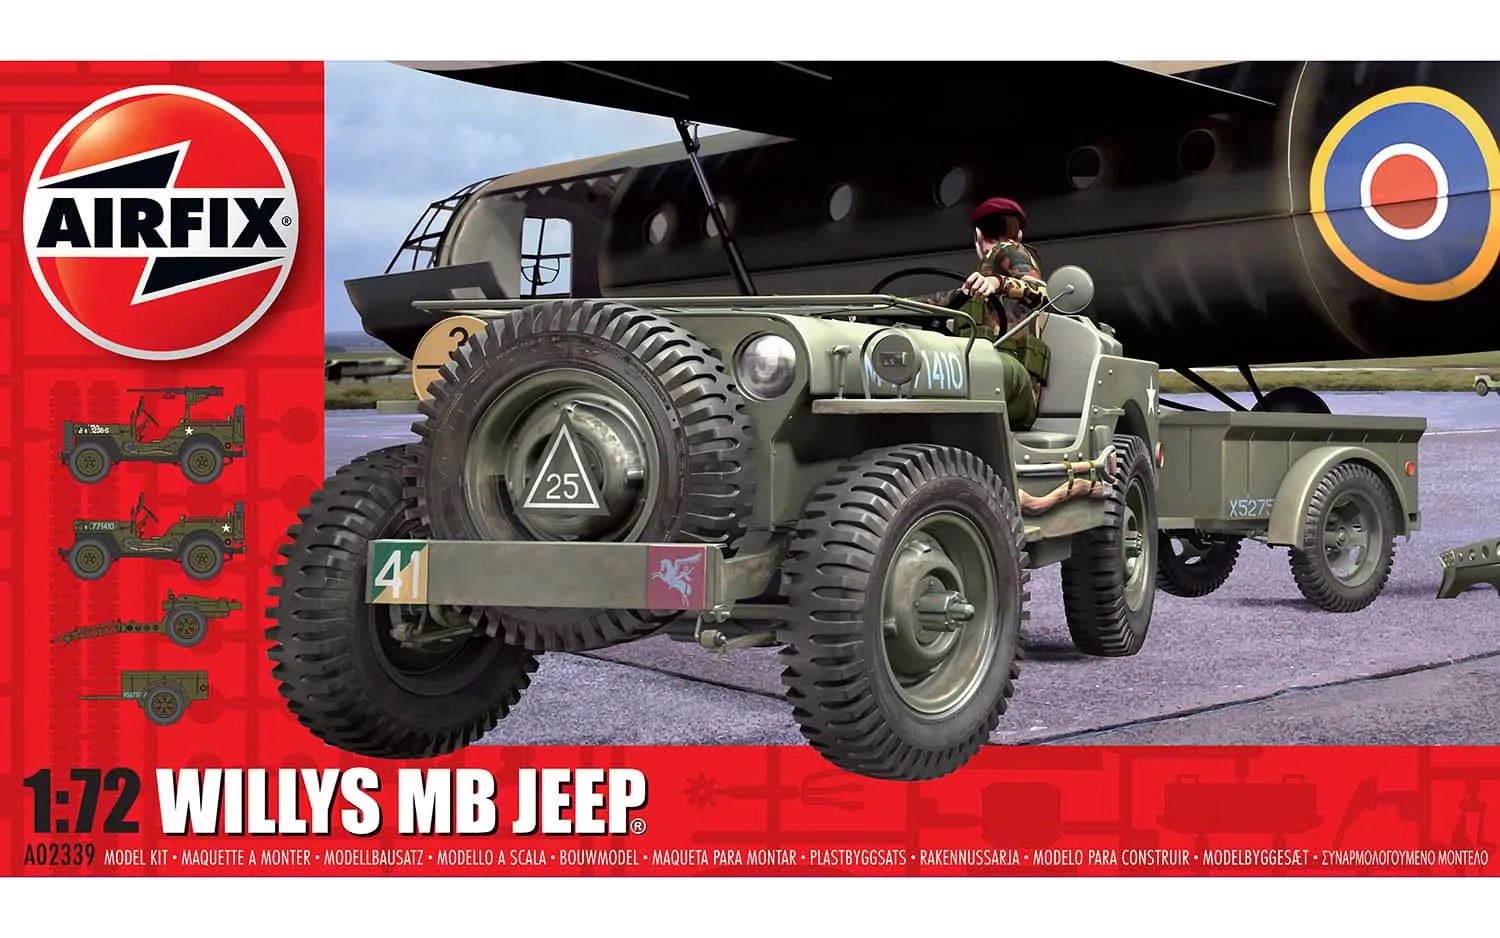 Willies MB Jeep airfix 1/72 ao2339